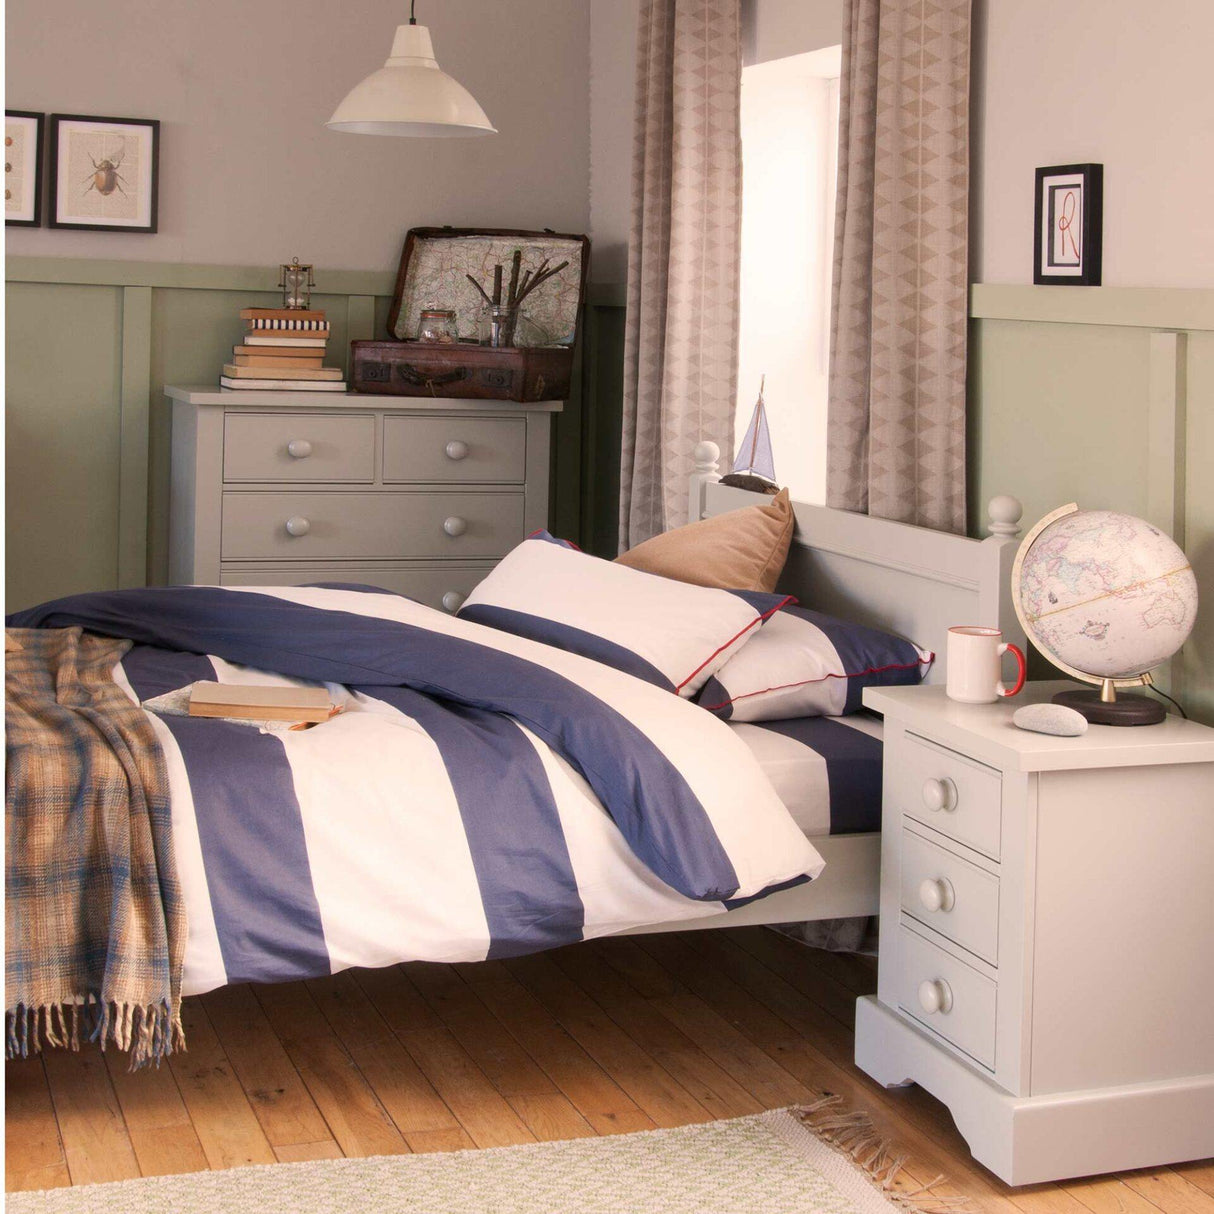 Little Folks Fargo Small Double Bed In Farleigh Grey - Little Snoozes